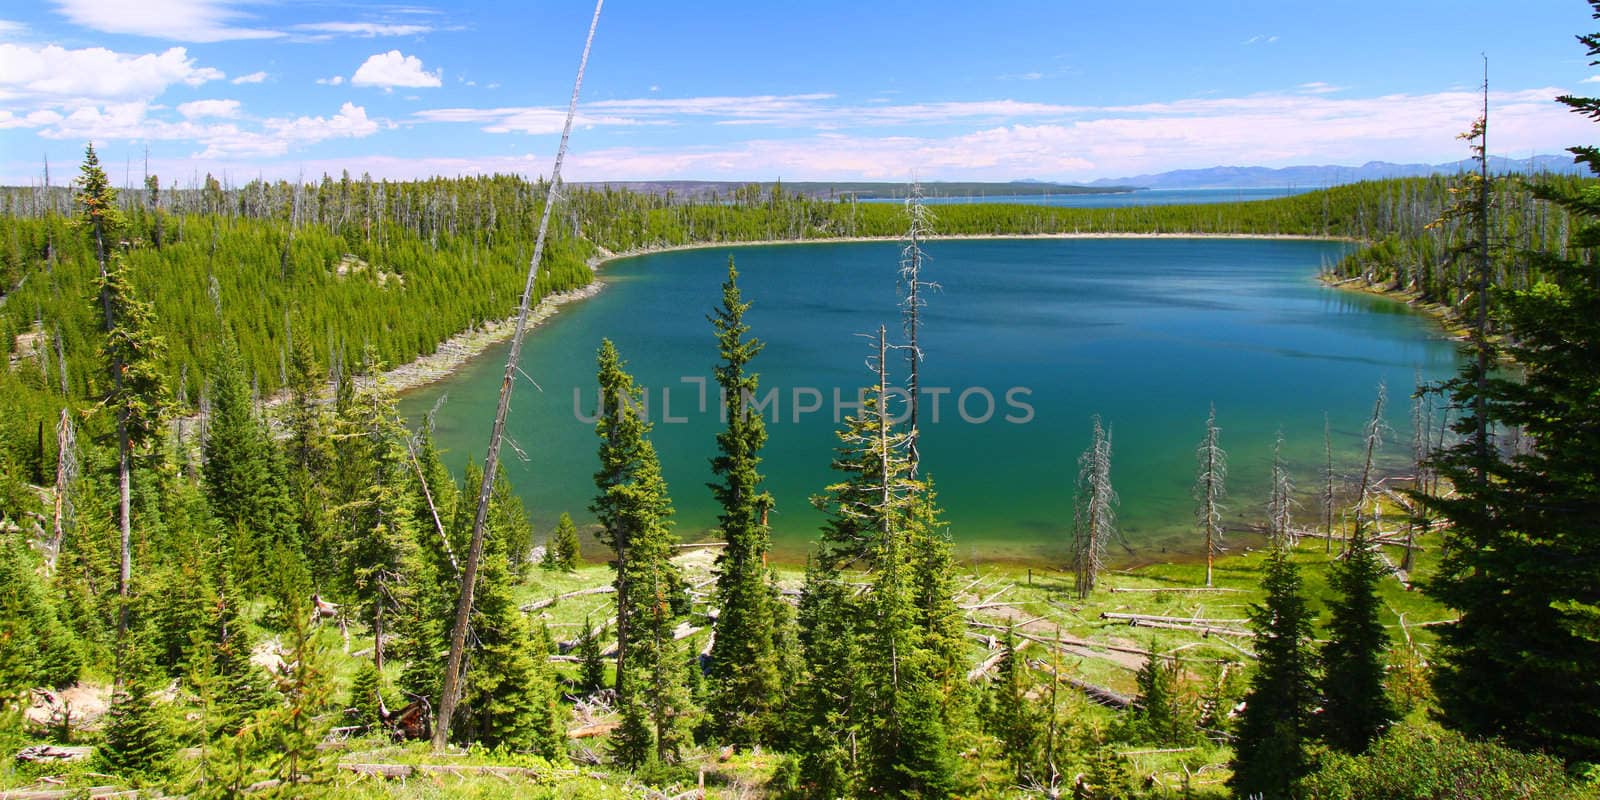 Duck Lake - Yellowstone NP by Wirepec